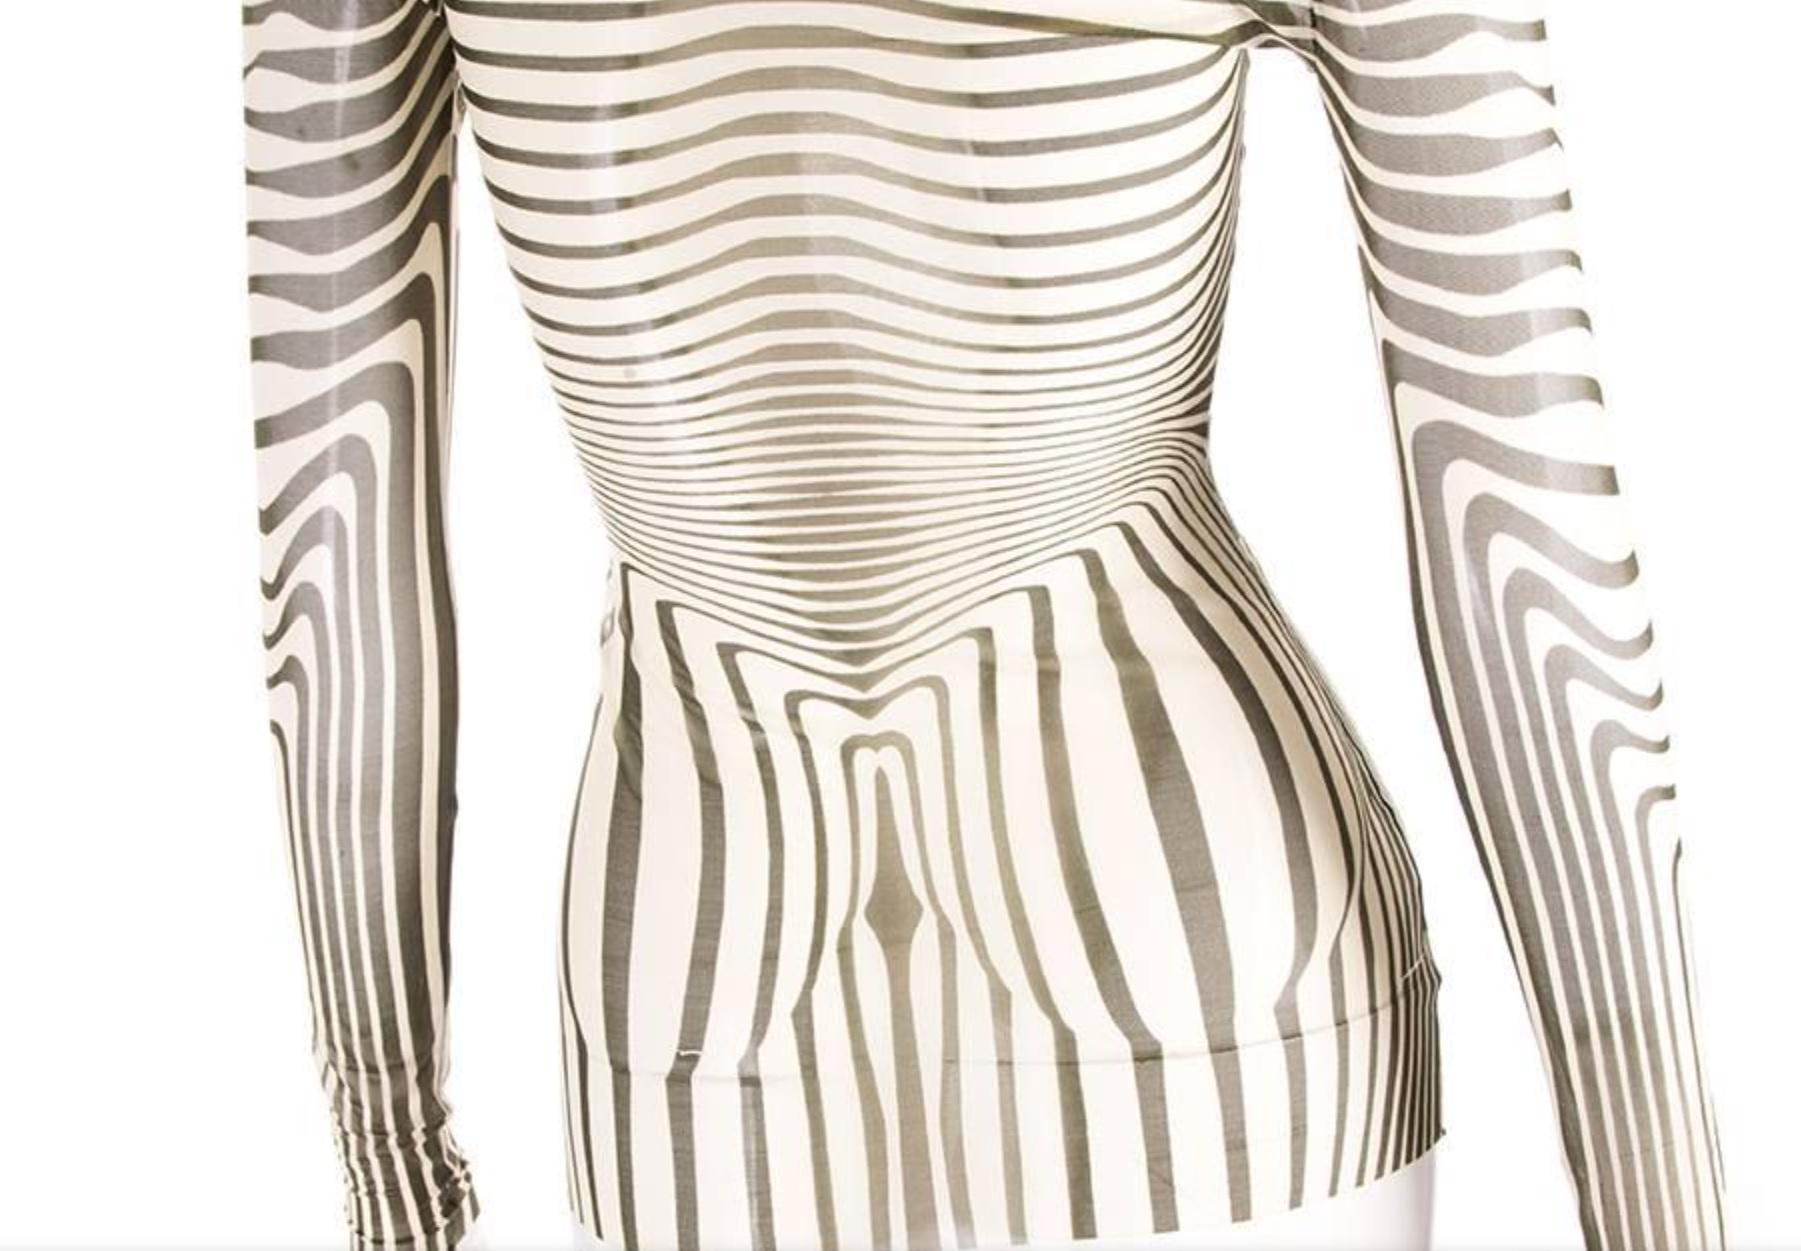 Gray Jean Paul Gaultier Cyberbaba Zebra Optical Illusion Striped Transparent Mesh Top